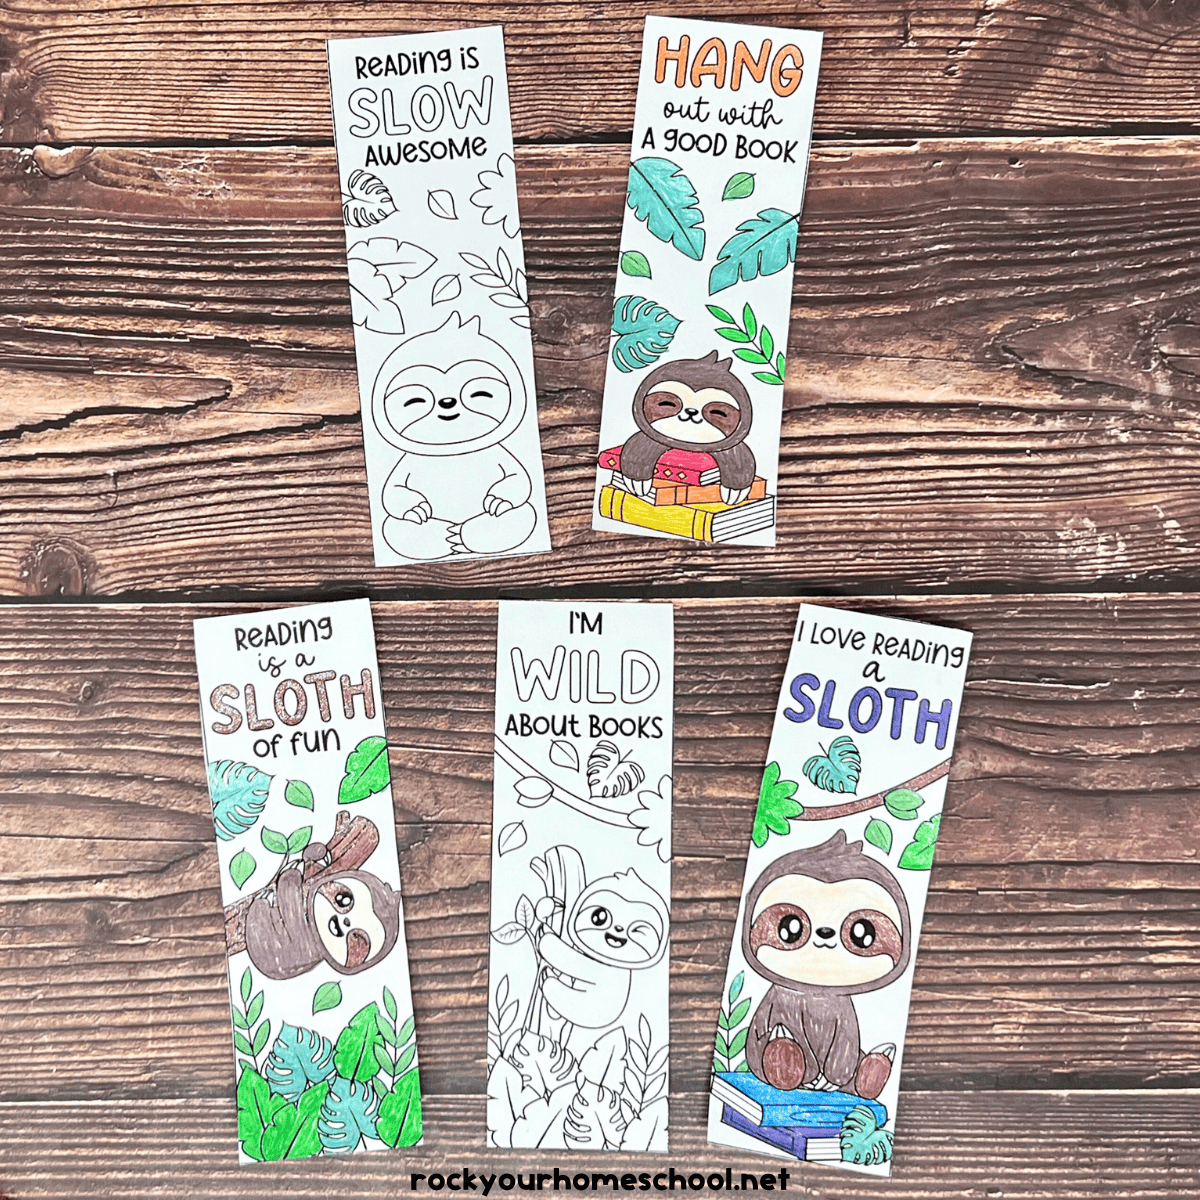 Sloth Bookmarks to Color for DIY Reading Fun (Free)